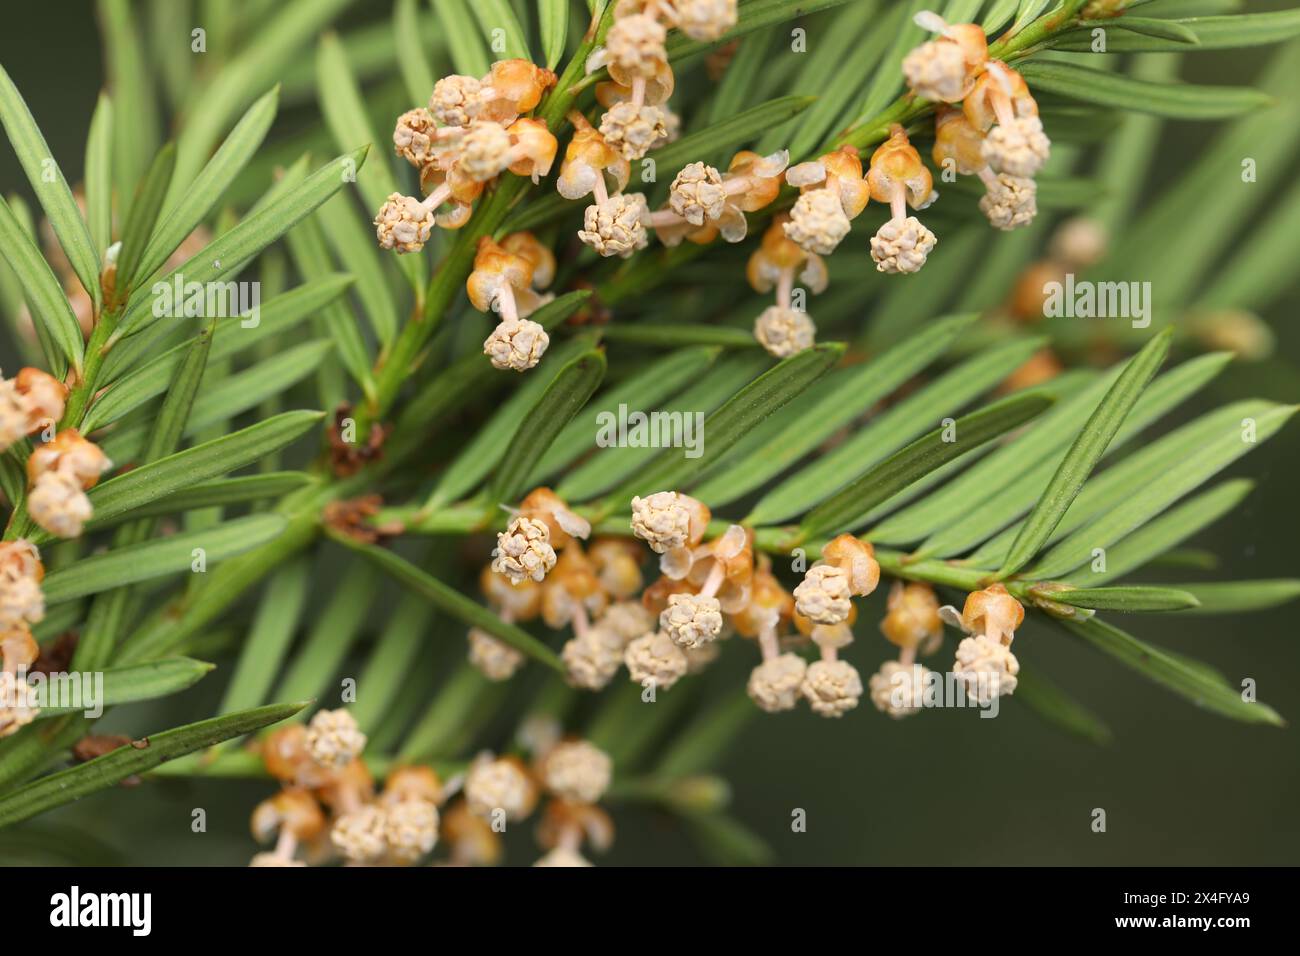 Yew tree branch with spring flowers in the garden Stock Photo